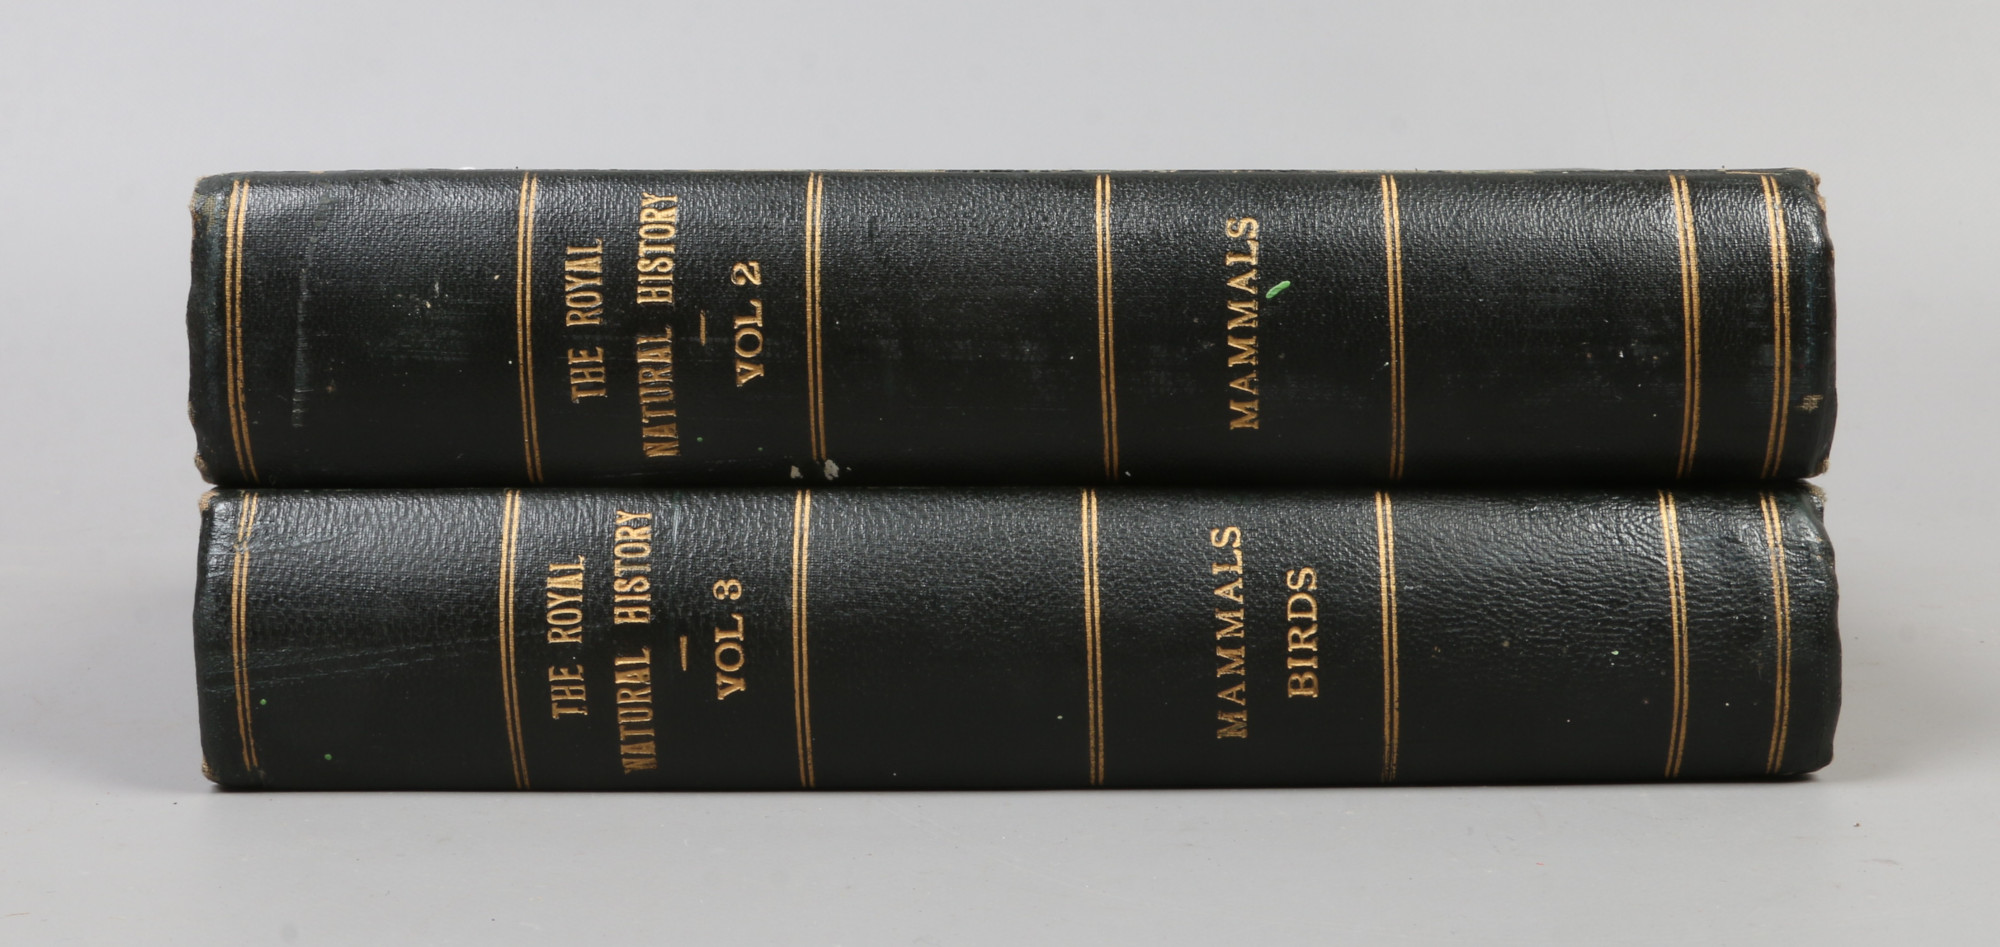 Volumes 2 and 3 of The Royal Natural History, edited by Richard Lydekker illustrated with coloured